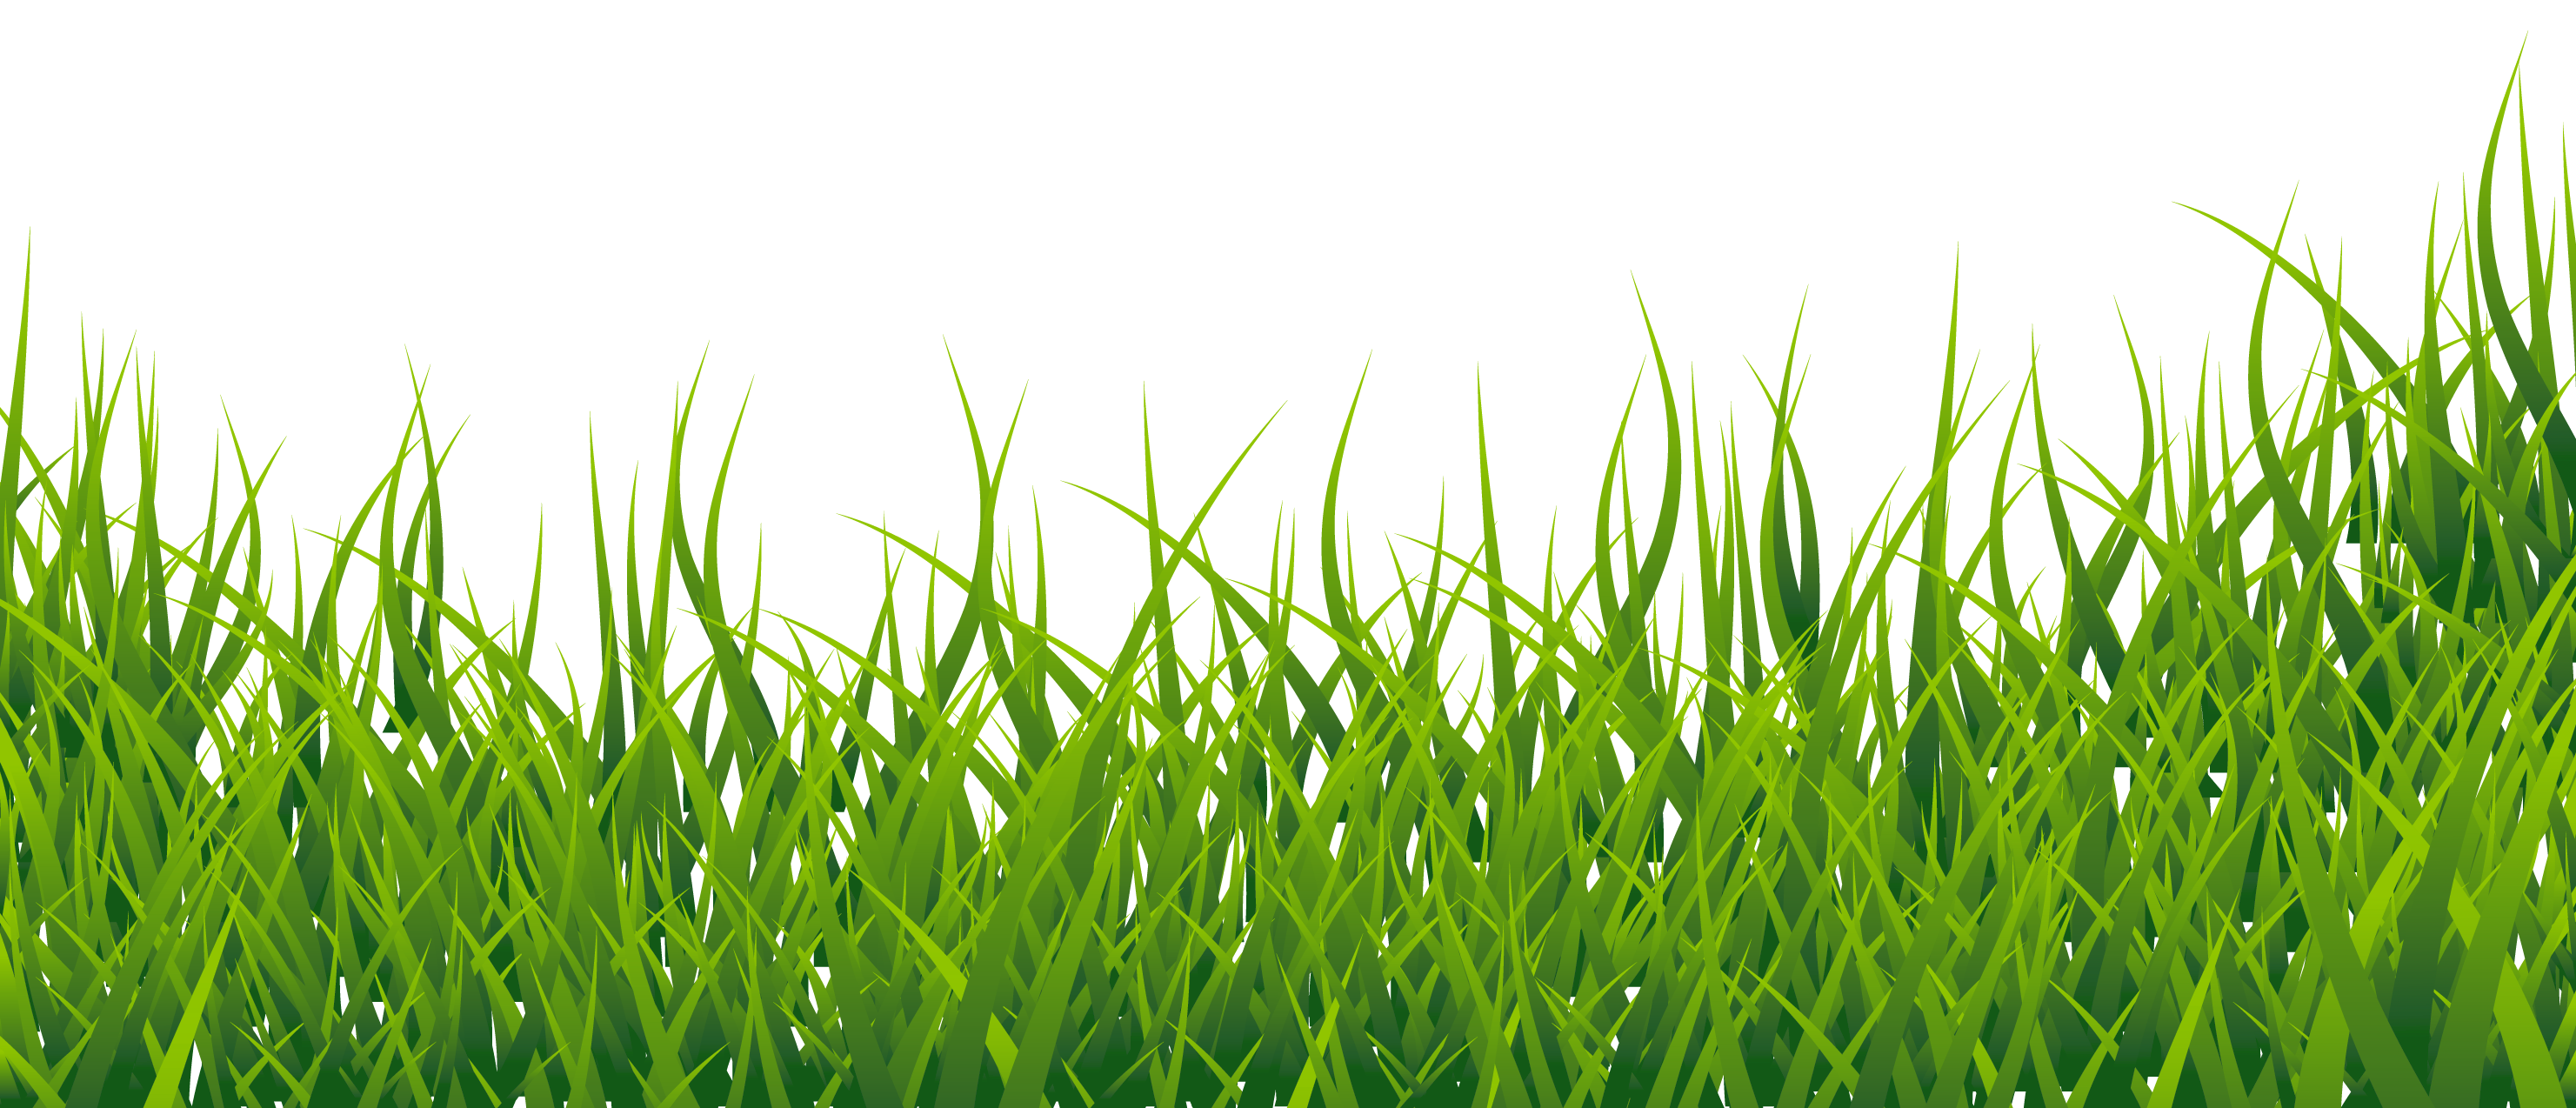 Free grass cliparts.